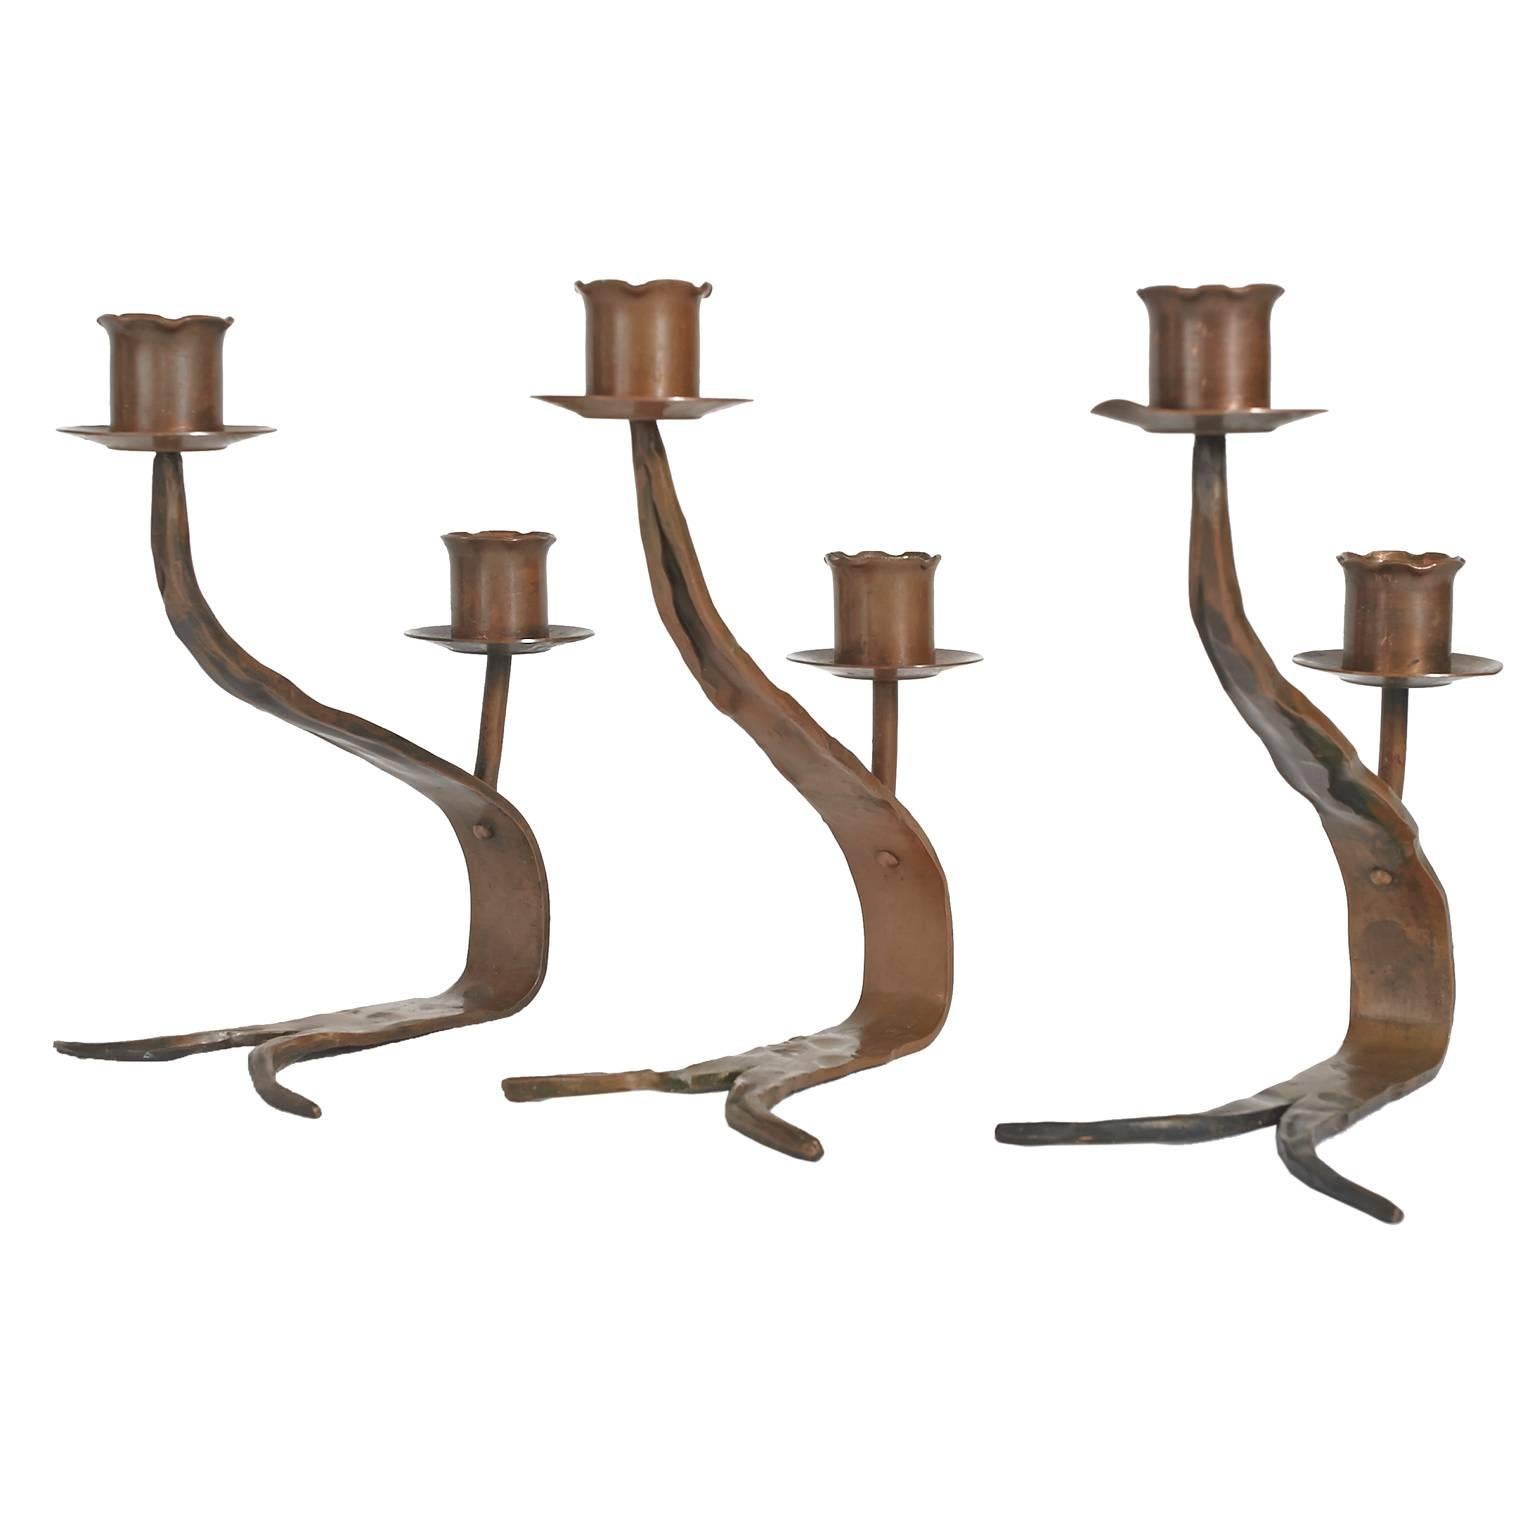  Three Erhard Glander Hand-Wrought Copper Double Candleholders For Sale